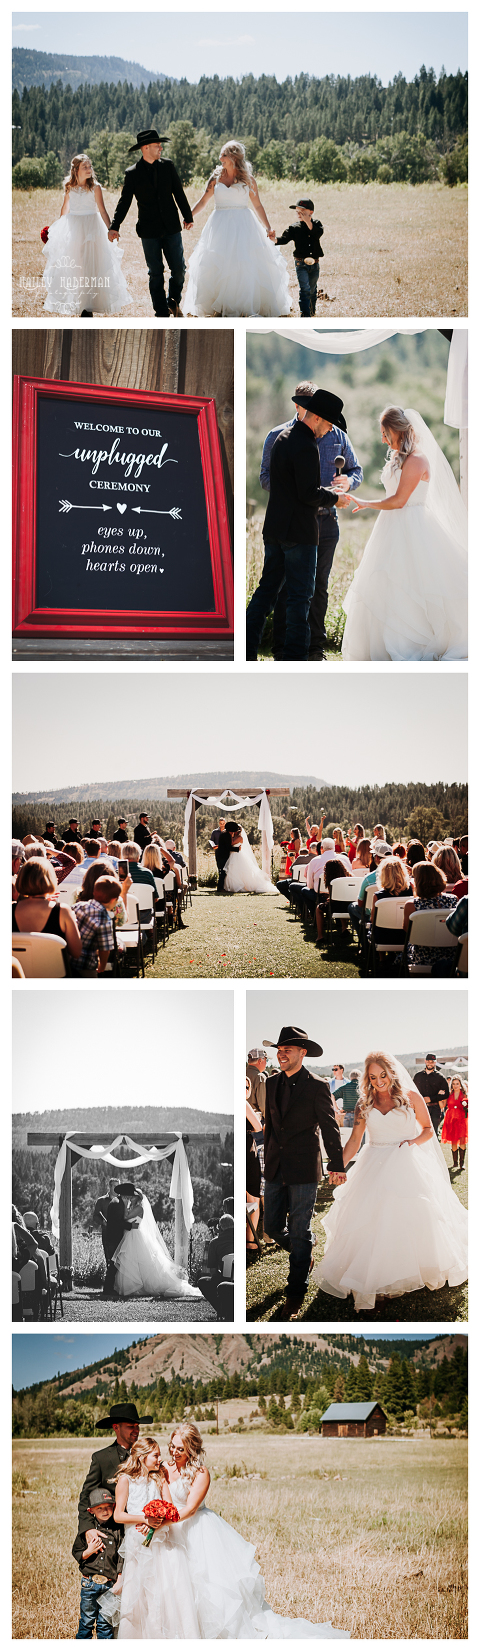 Ceremony details, Ryan and Amber married at The Cattle barn in Cle Elum, WA, photographed by Hailey Haberman Ellensburg Wedding Photographer